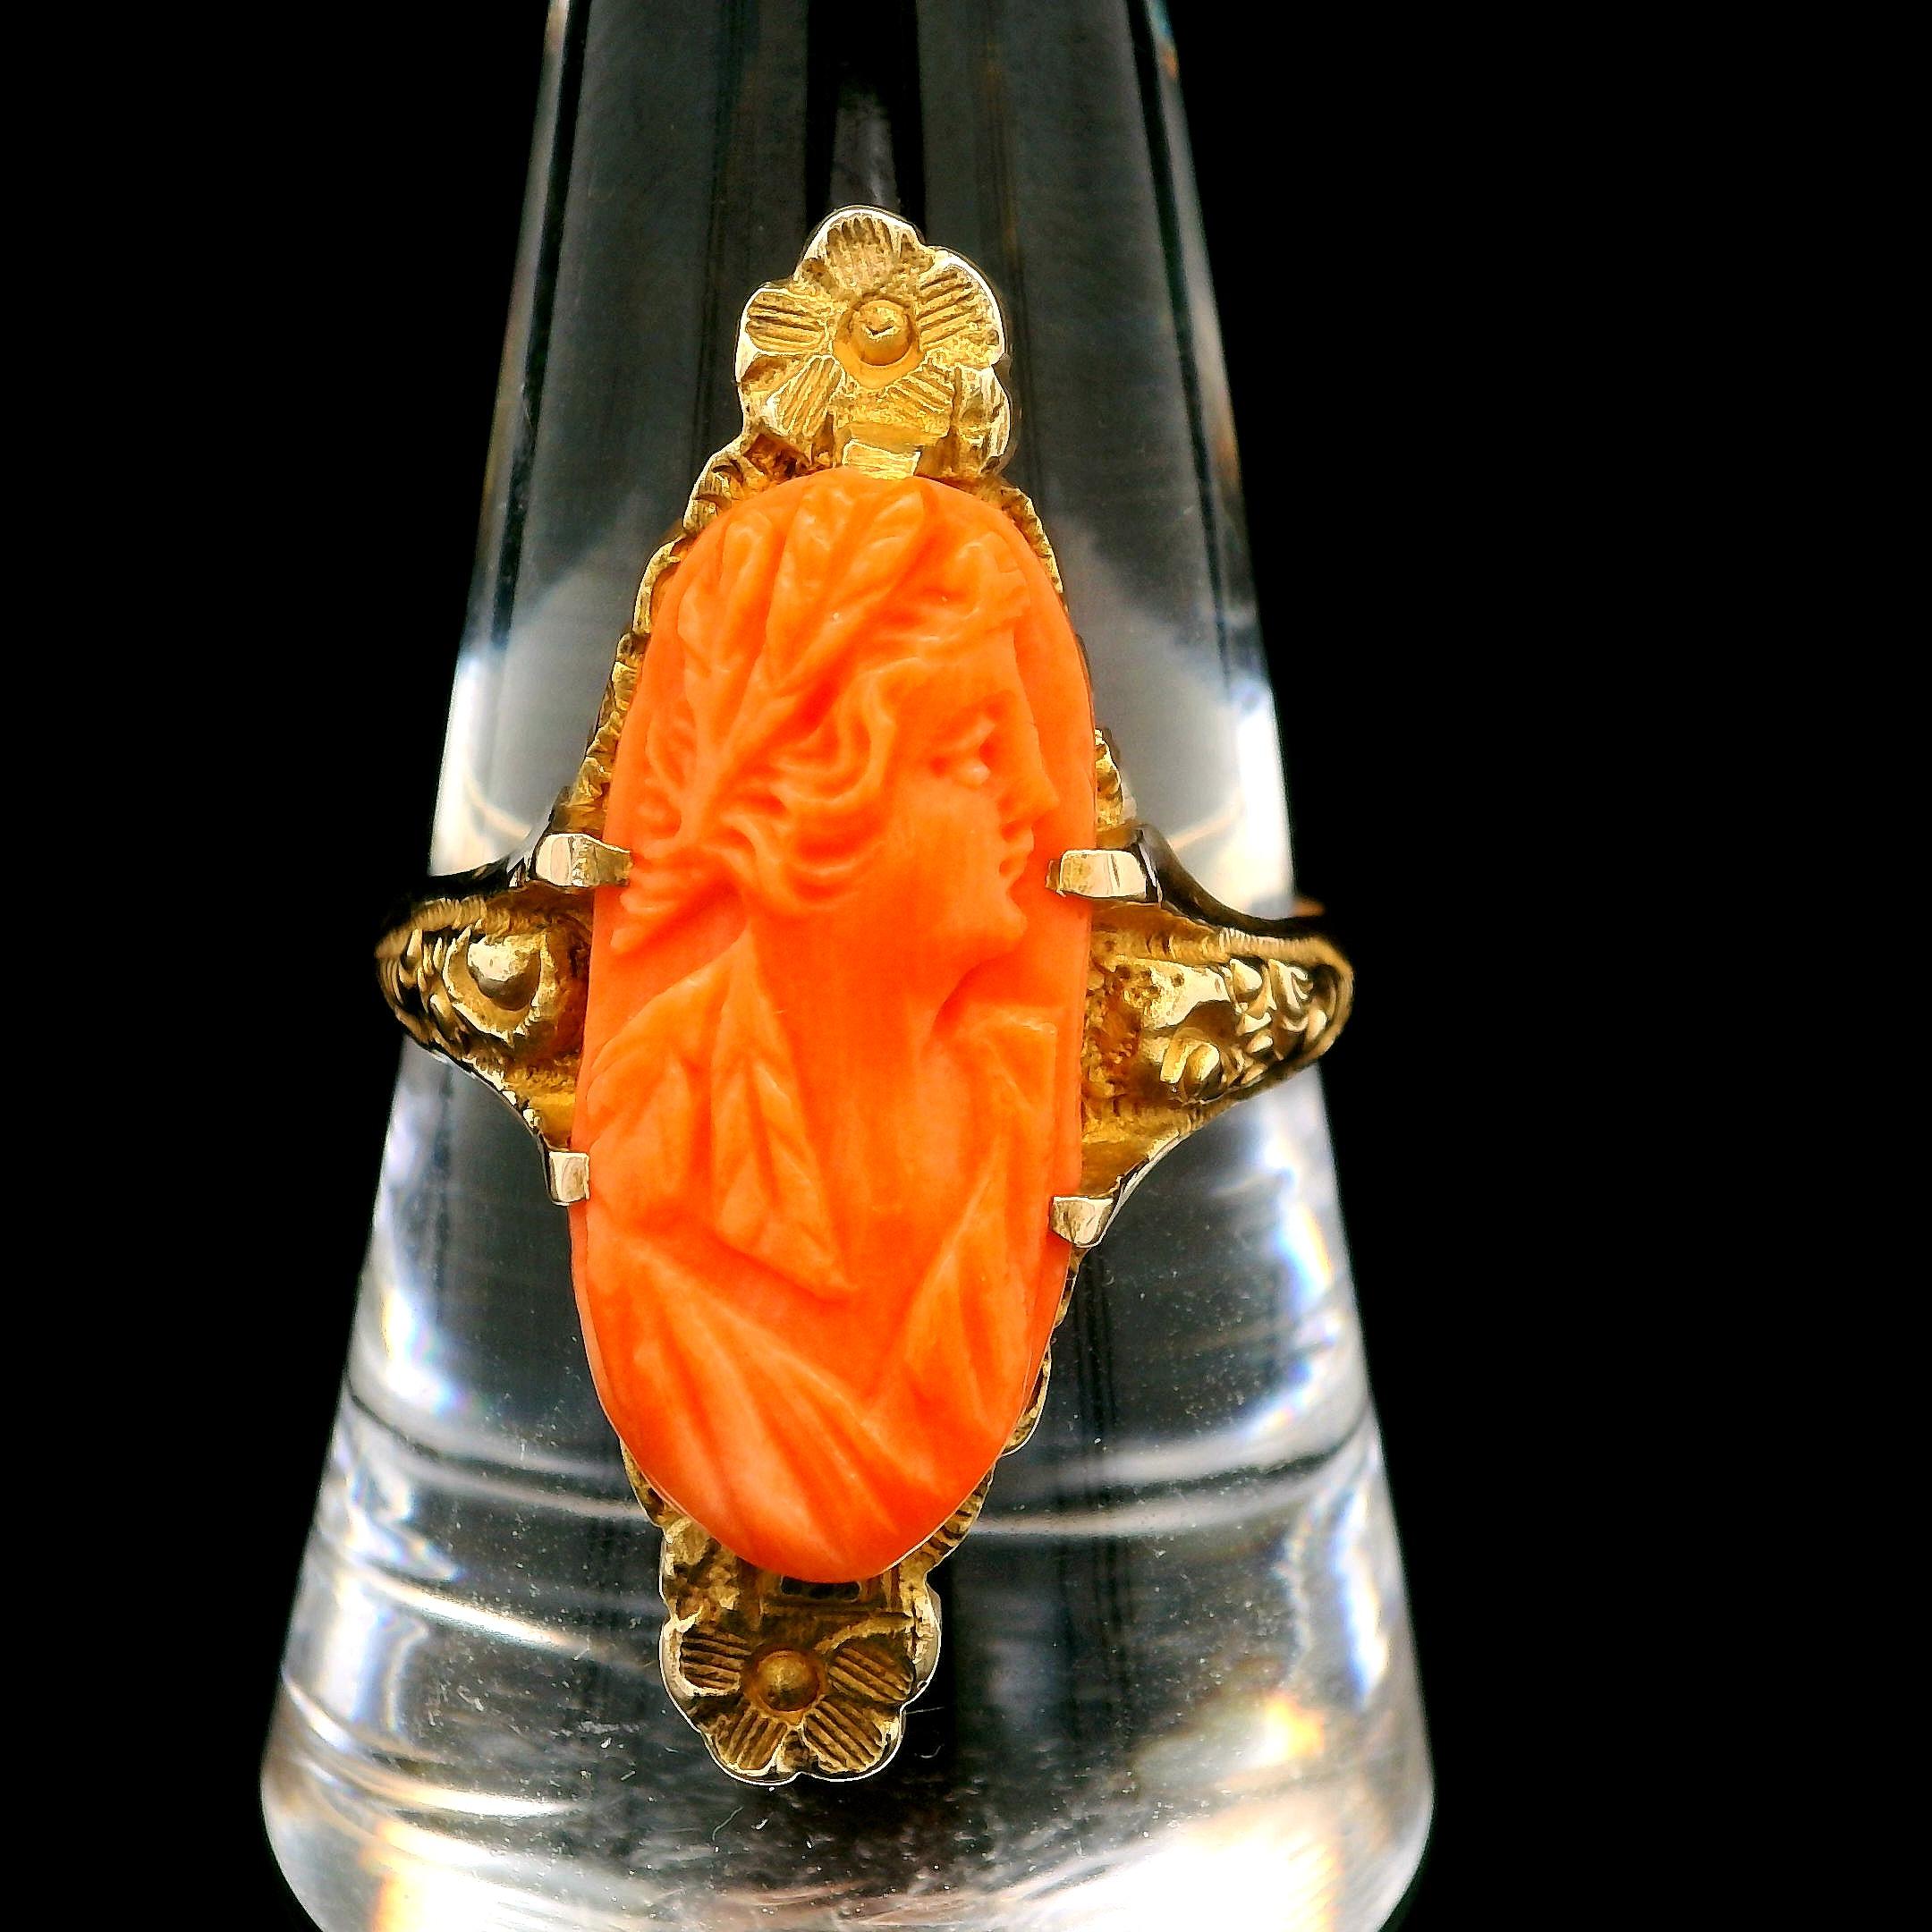 –Stone(s)–
(1) Natural Genuine Coral - Oval Carved Cameo - Prong Set - Gorgeous Rich Orange Color  - mm (approx.)
Material: Solid 10k Yellow Gold
Weight: 4.93 Grams
Ring Size: 9.5 ( fitted on finger, please contact us prior to purchase with sizing